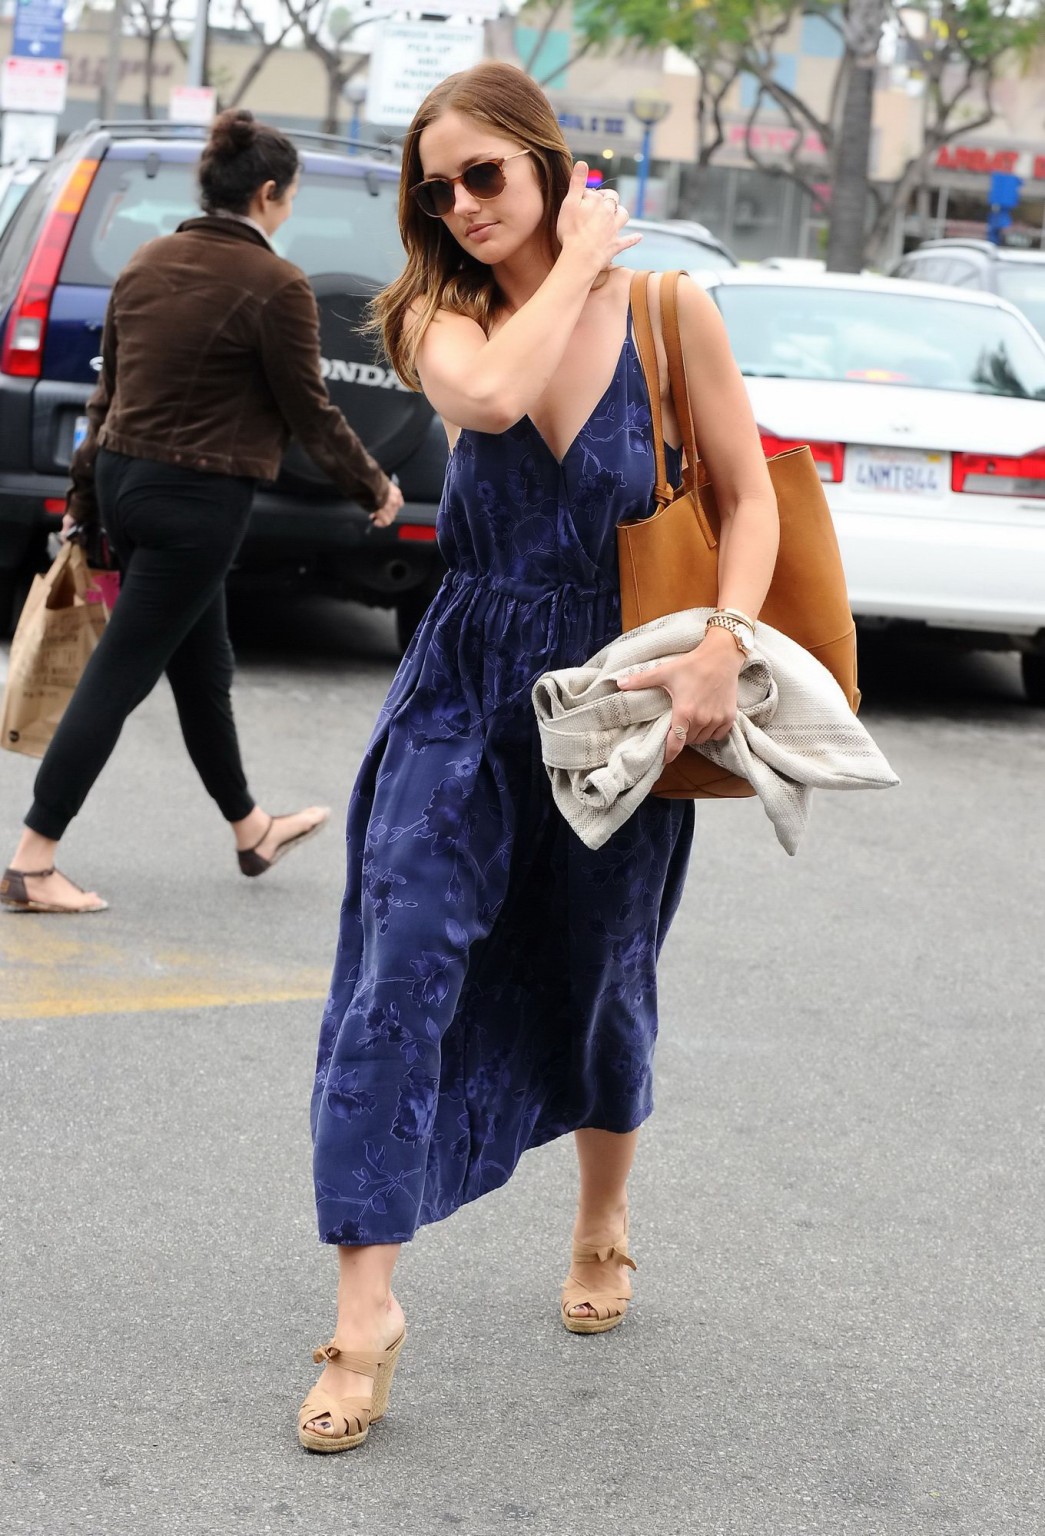 Minka Kelly braless showing big cleavage and nipple pokies while shopping at Who #75161597